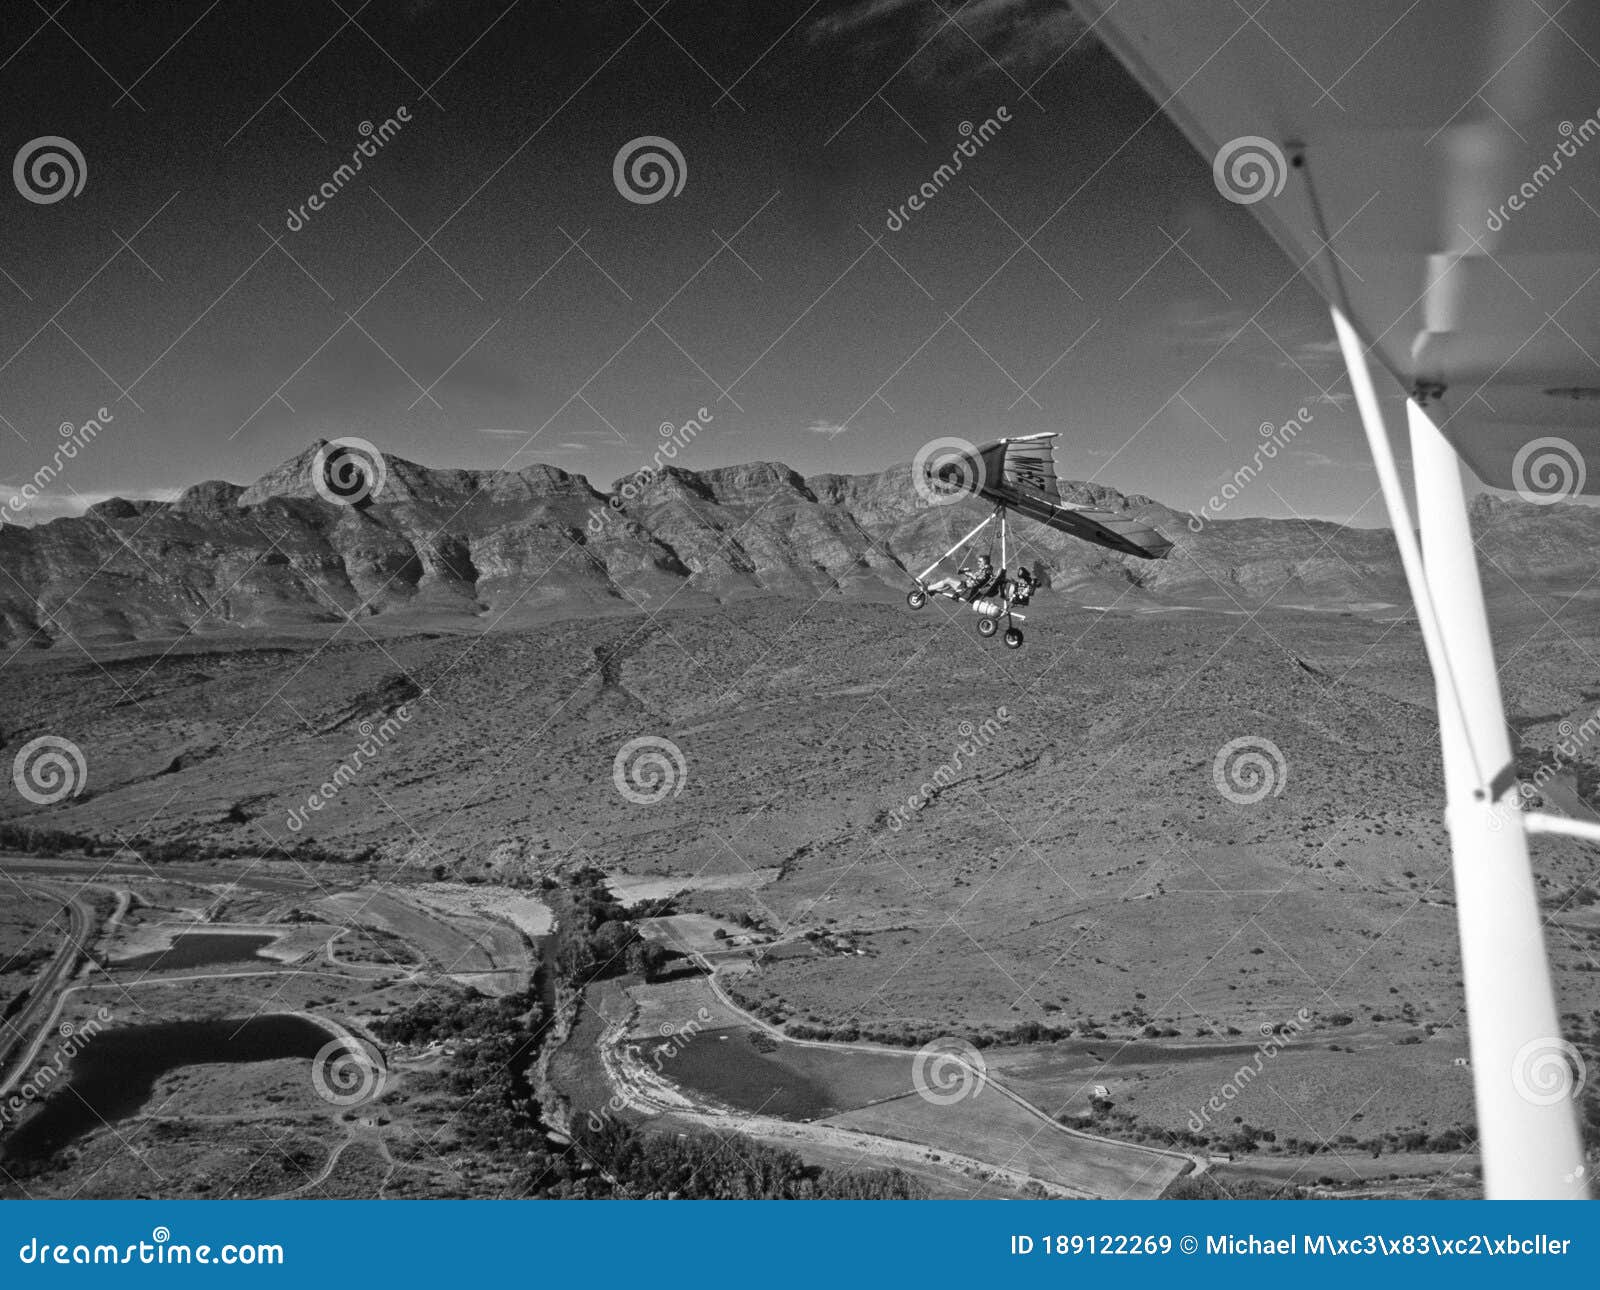 south africa: hangglider over the swartberg-mountains in the little karoo